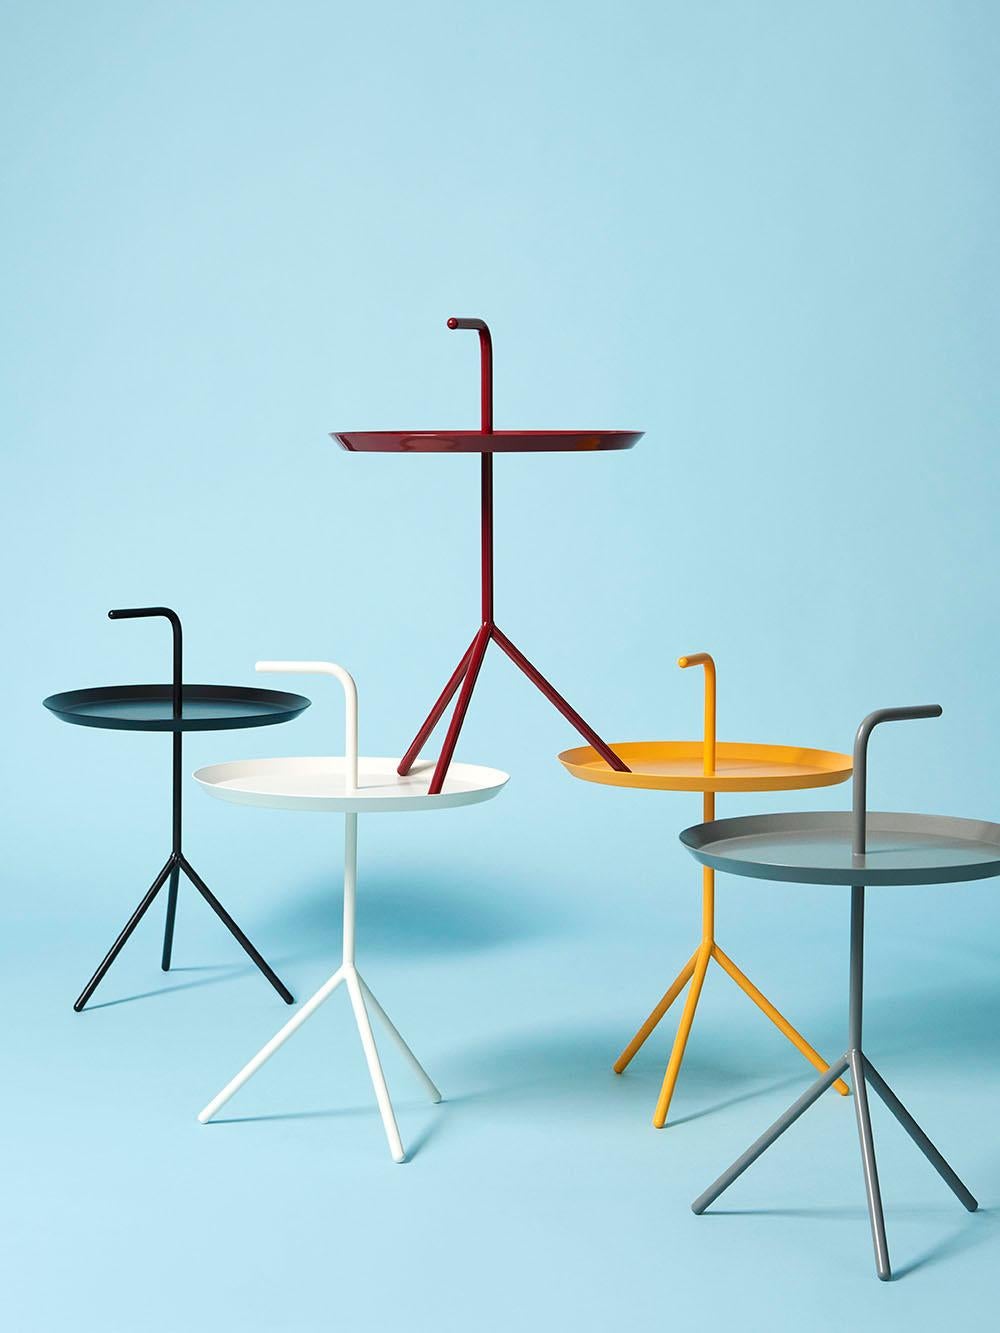 Thomas Bentzen’s portable side table is aptly named ‘Don’t Leave Me’. Abbreviated to DLM, it features a convenient handle that allows the metal table to be carried from room to room. Although it has a lightweight and portable structure, the three